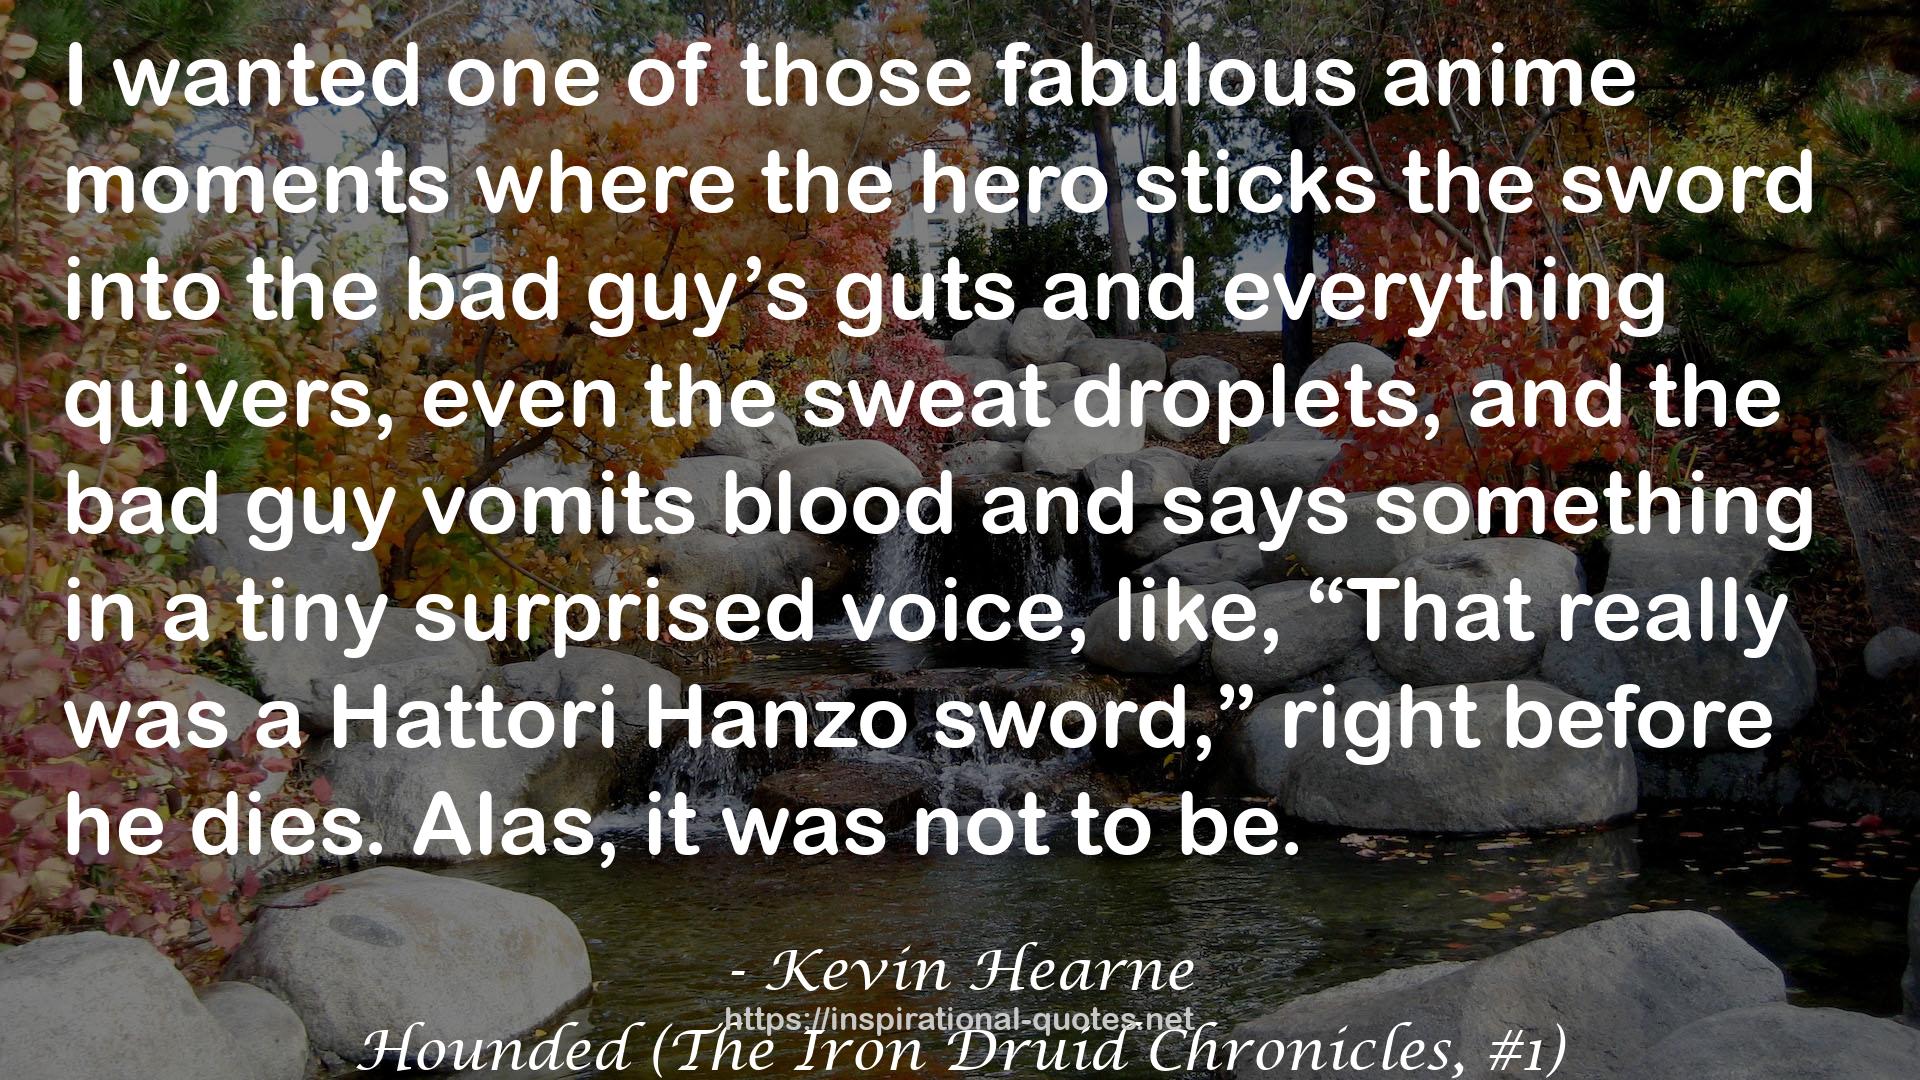 Hounded (The Iron Druid Chronicles, #1) QUOTES